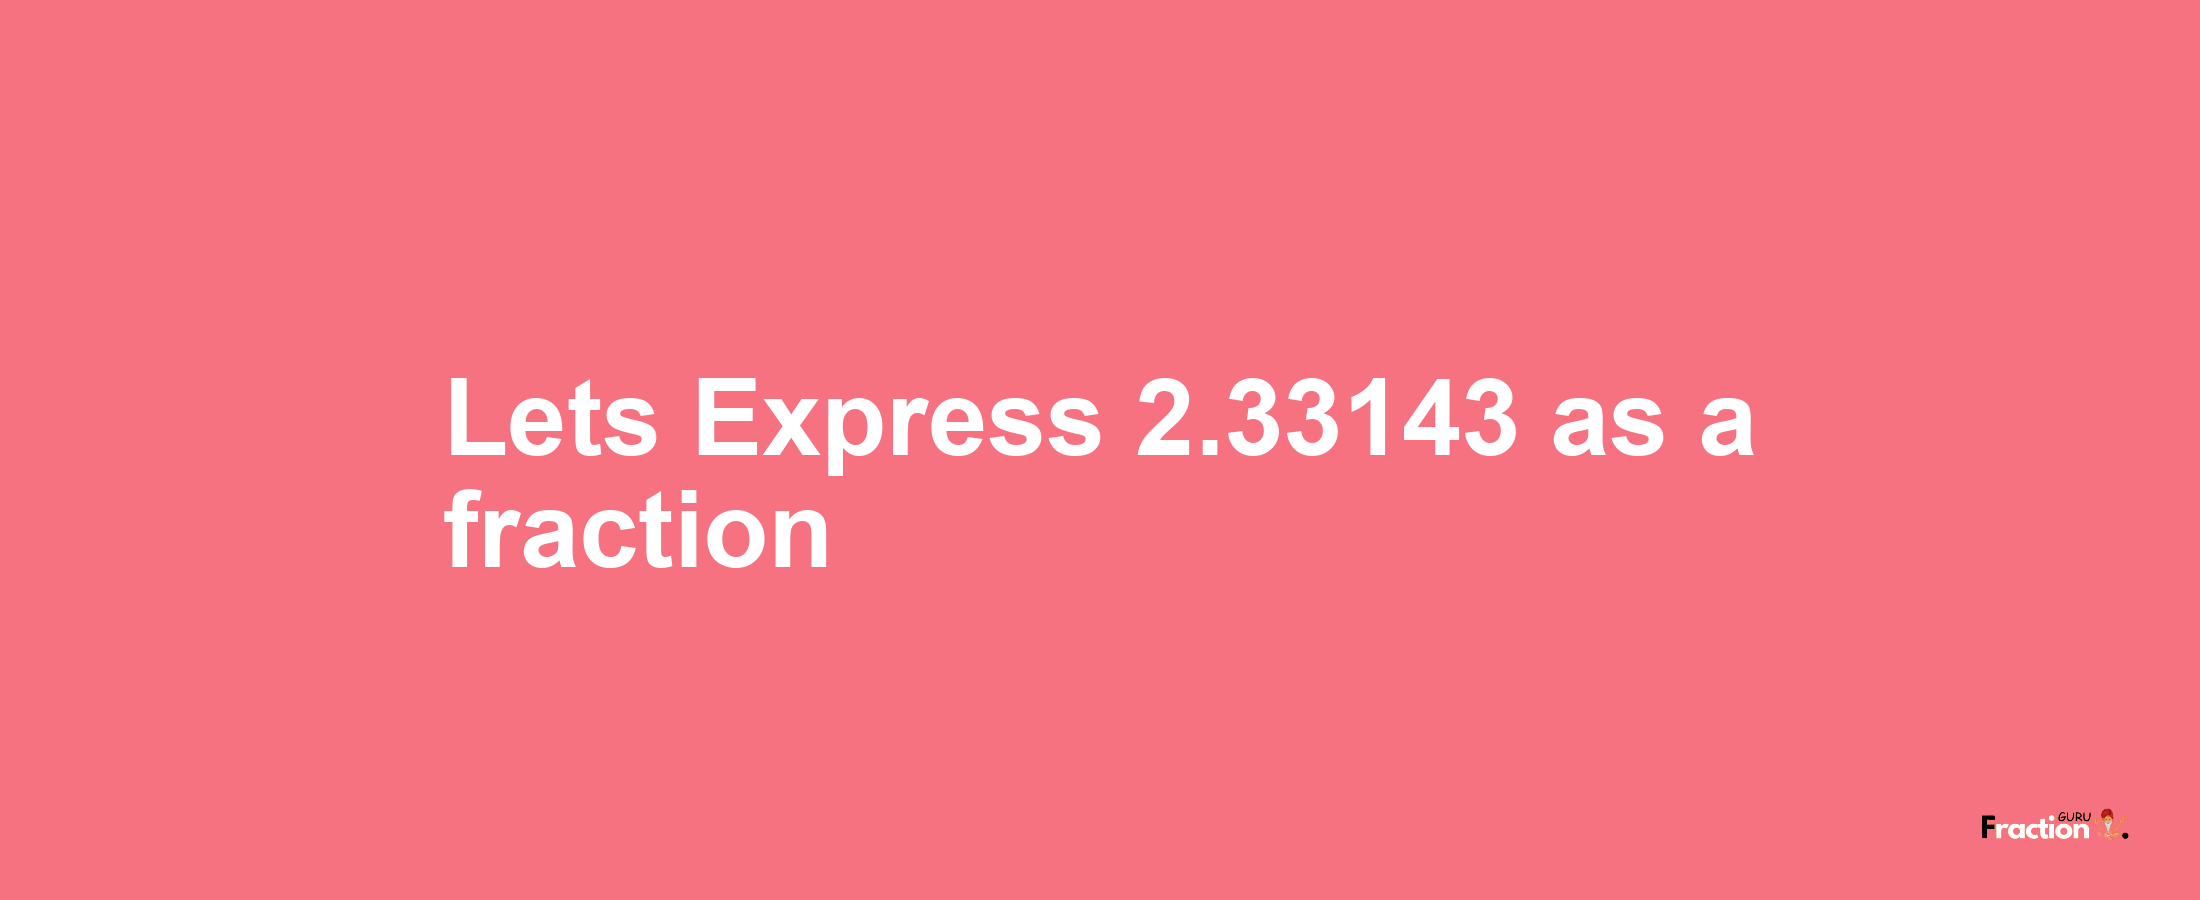 Lets Express 2.33143 as afraction